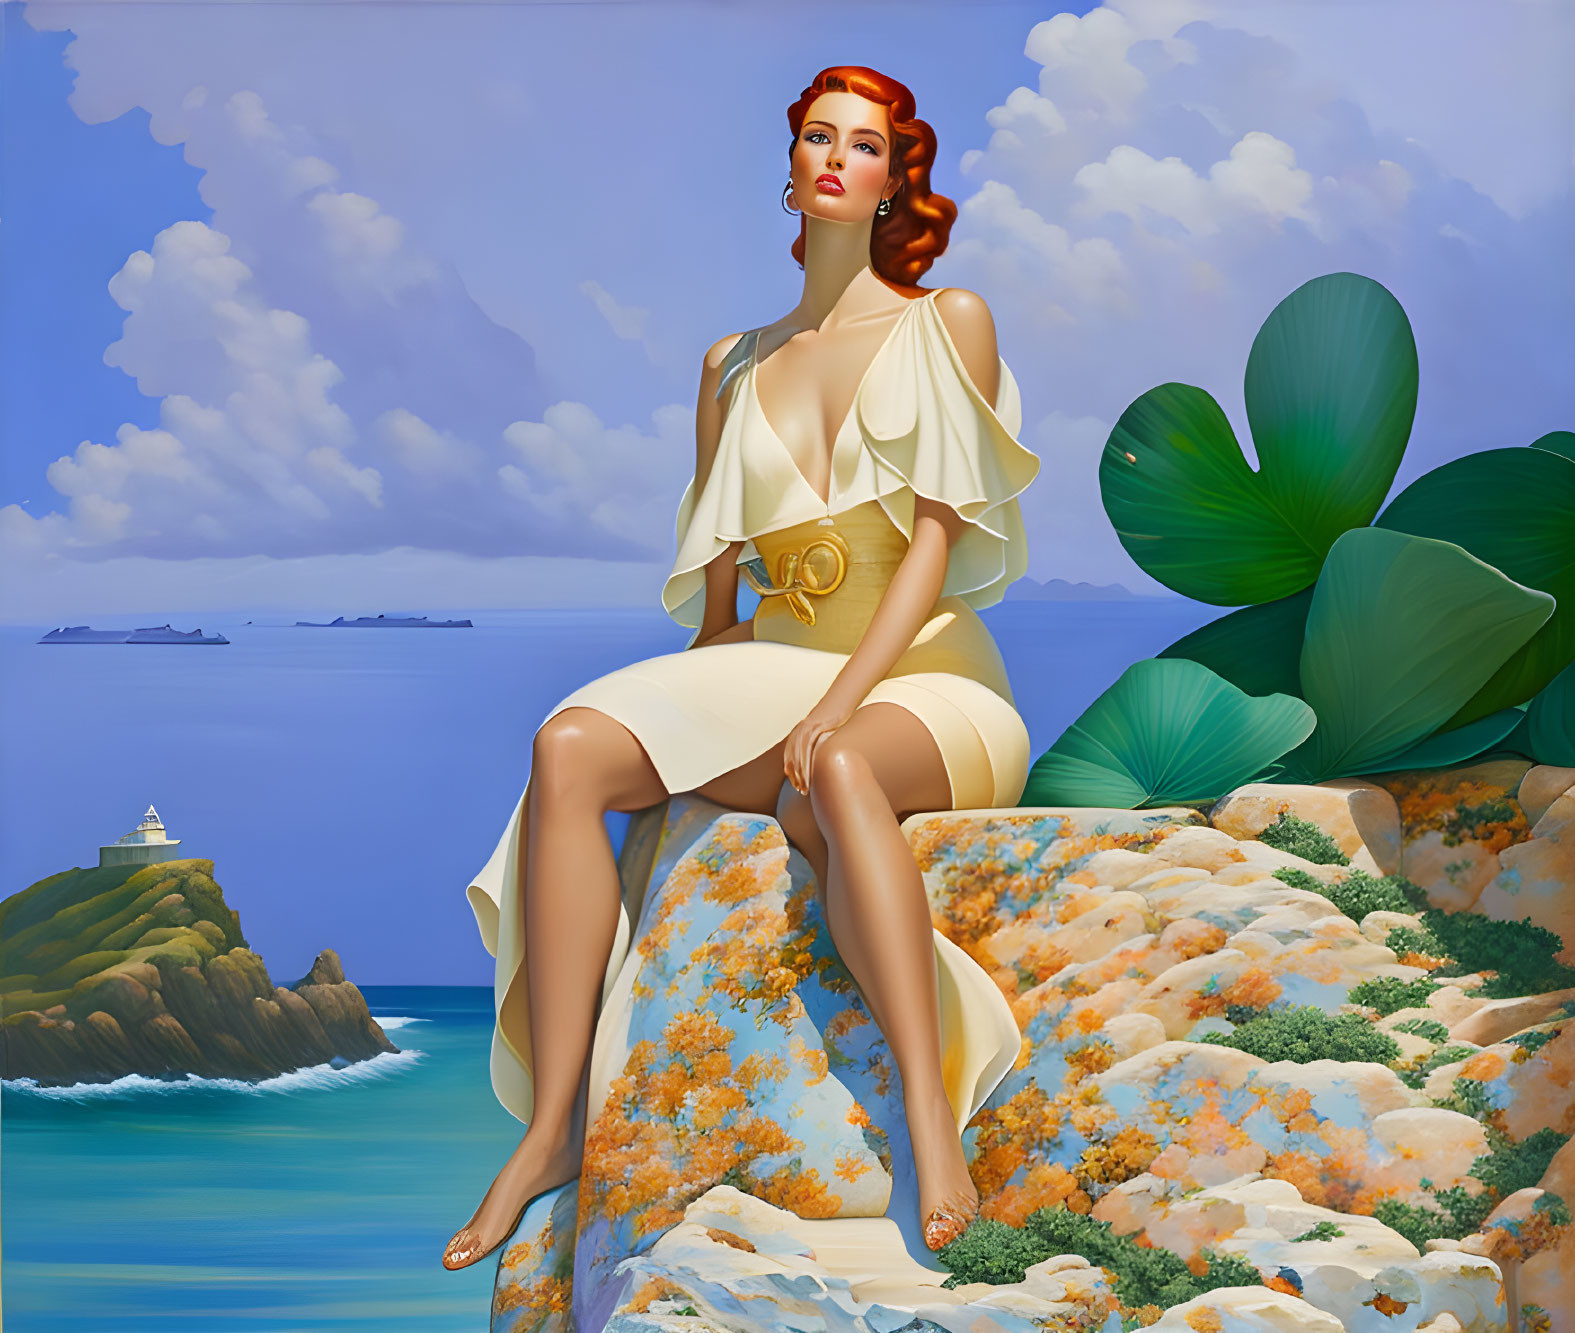 Illustration of woman on rocky outcrop by the sea with ships and greenery